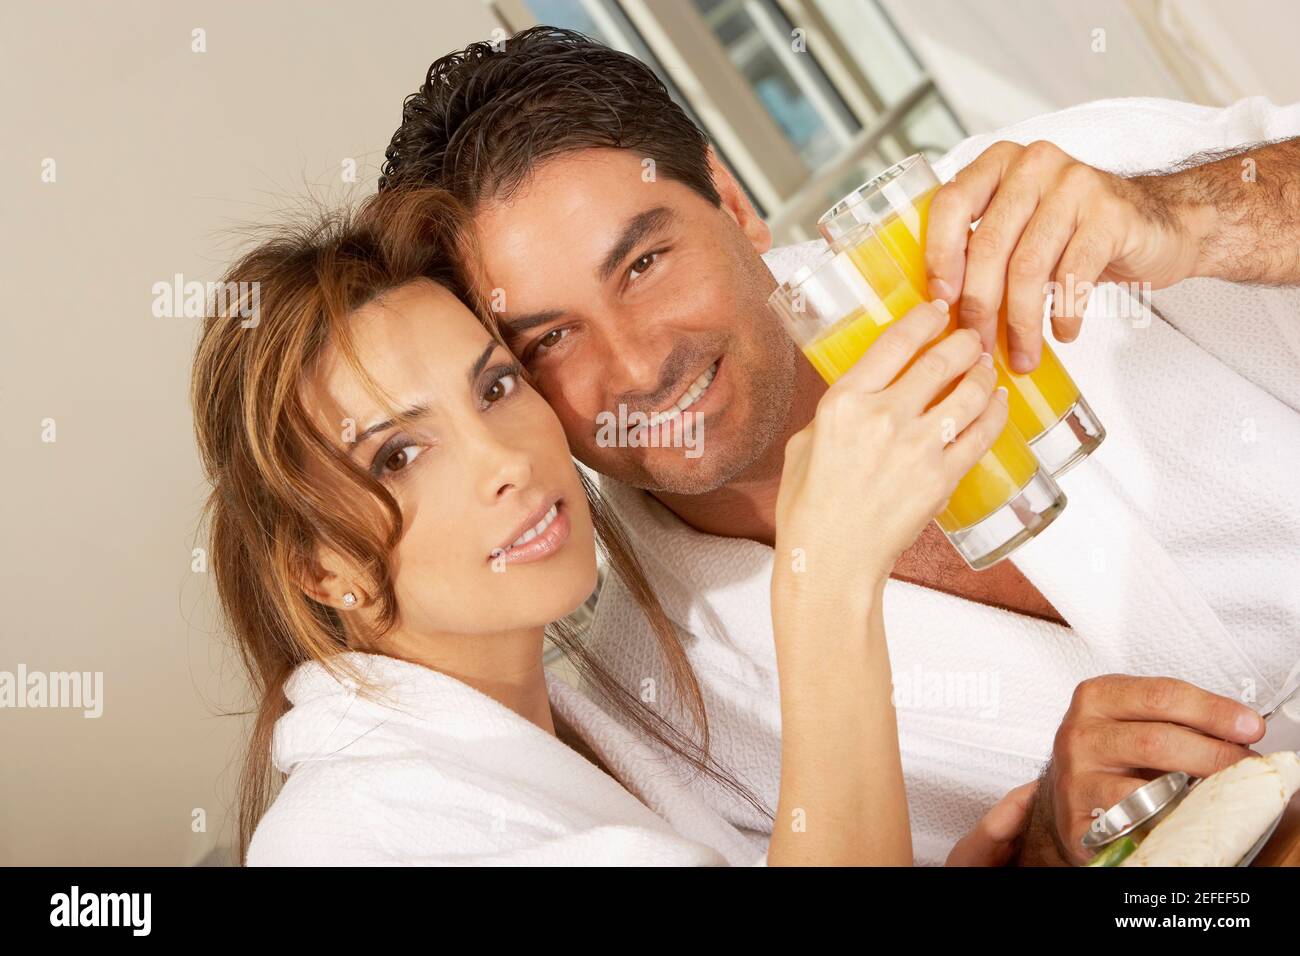 Portrait of a mid adult couple toasting with glasses of juice Stock Photo